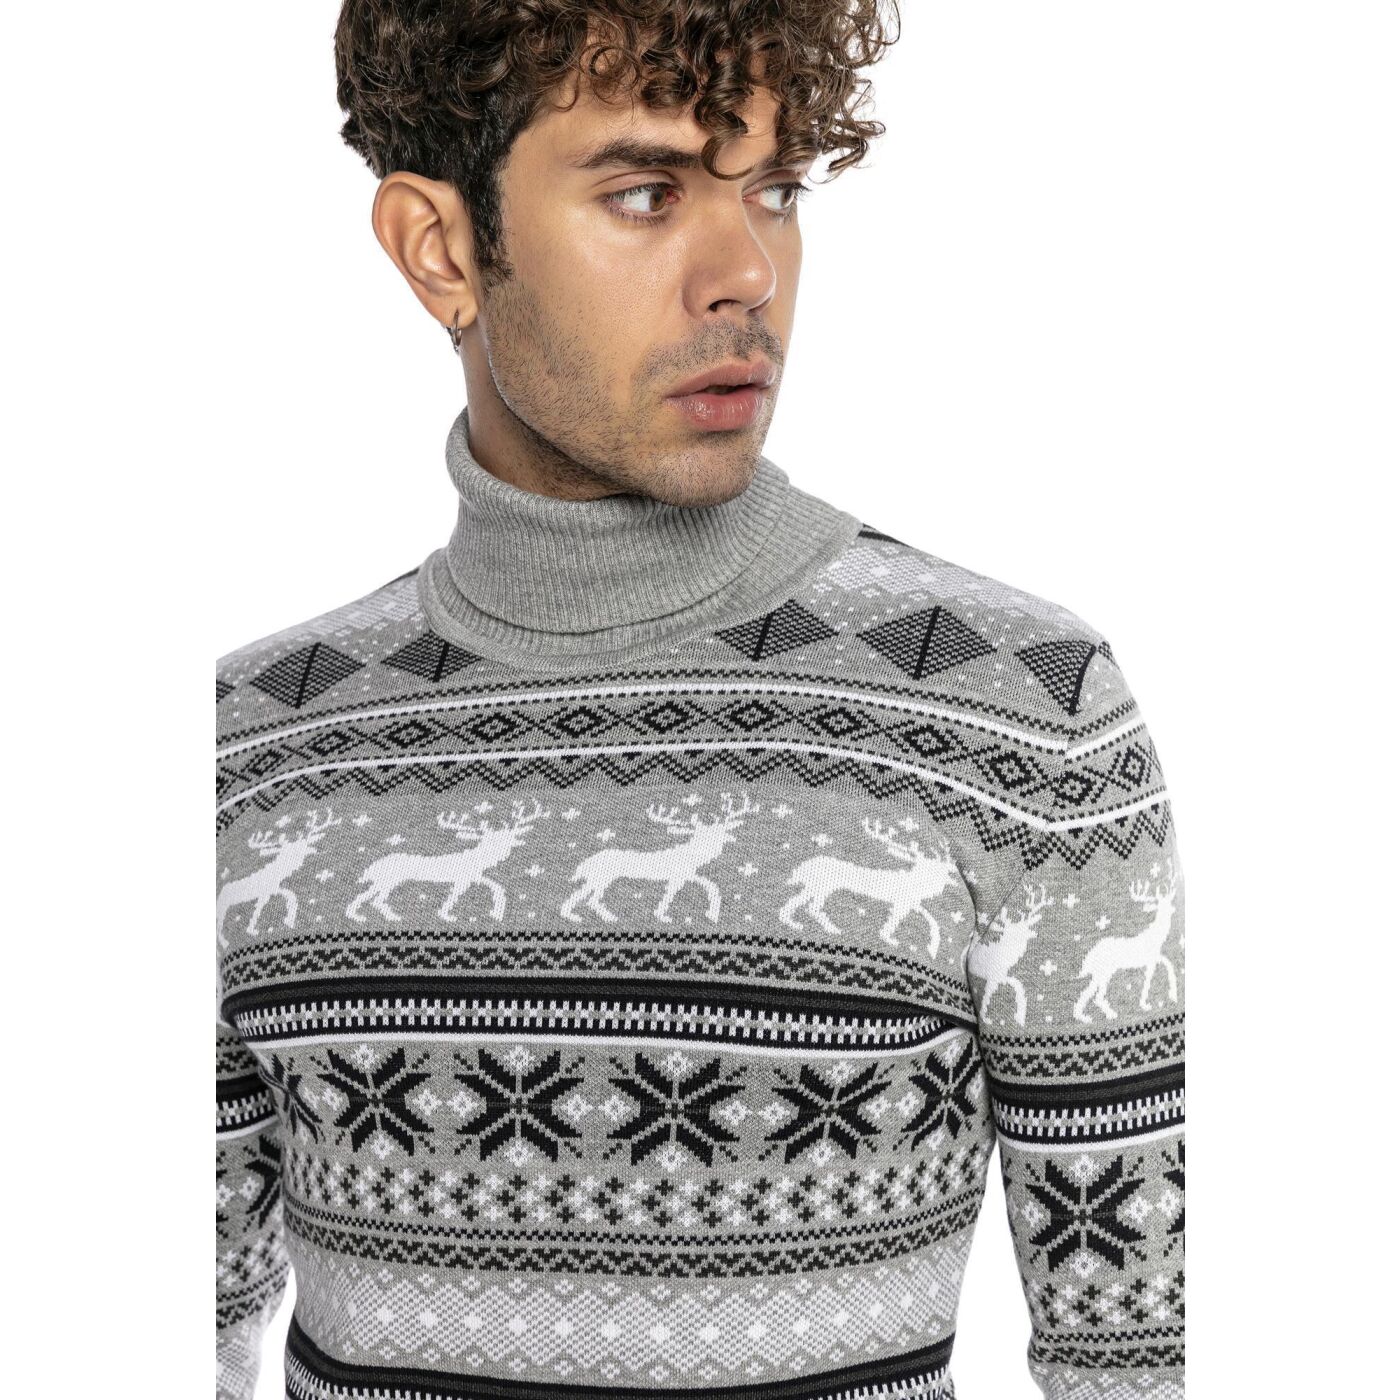 newrong Mens Turtleneck Knitted Jumper Sweater